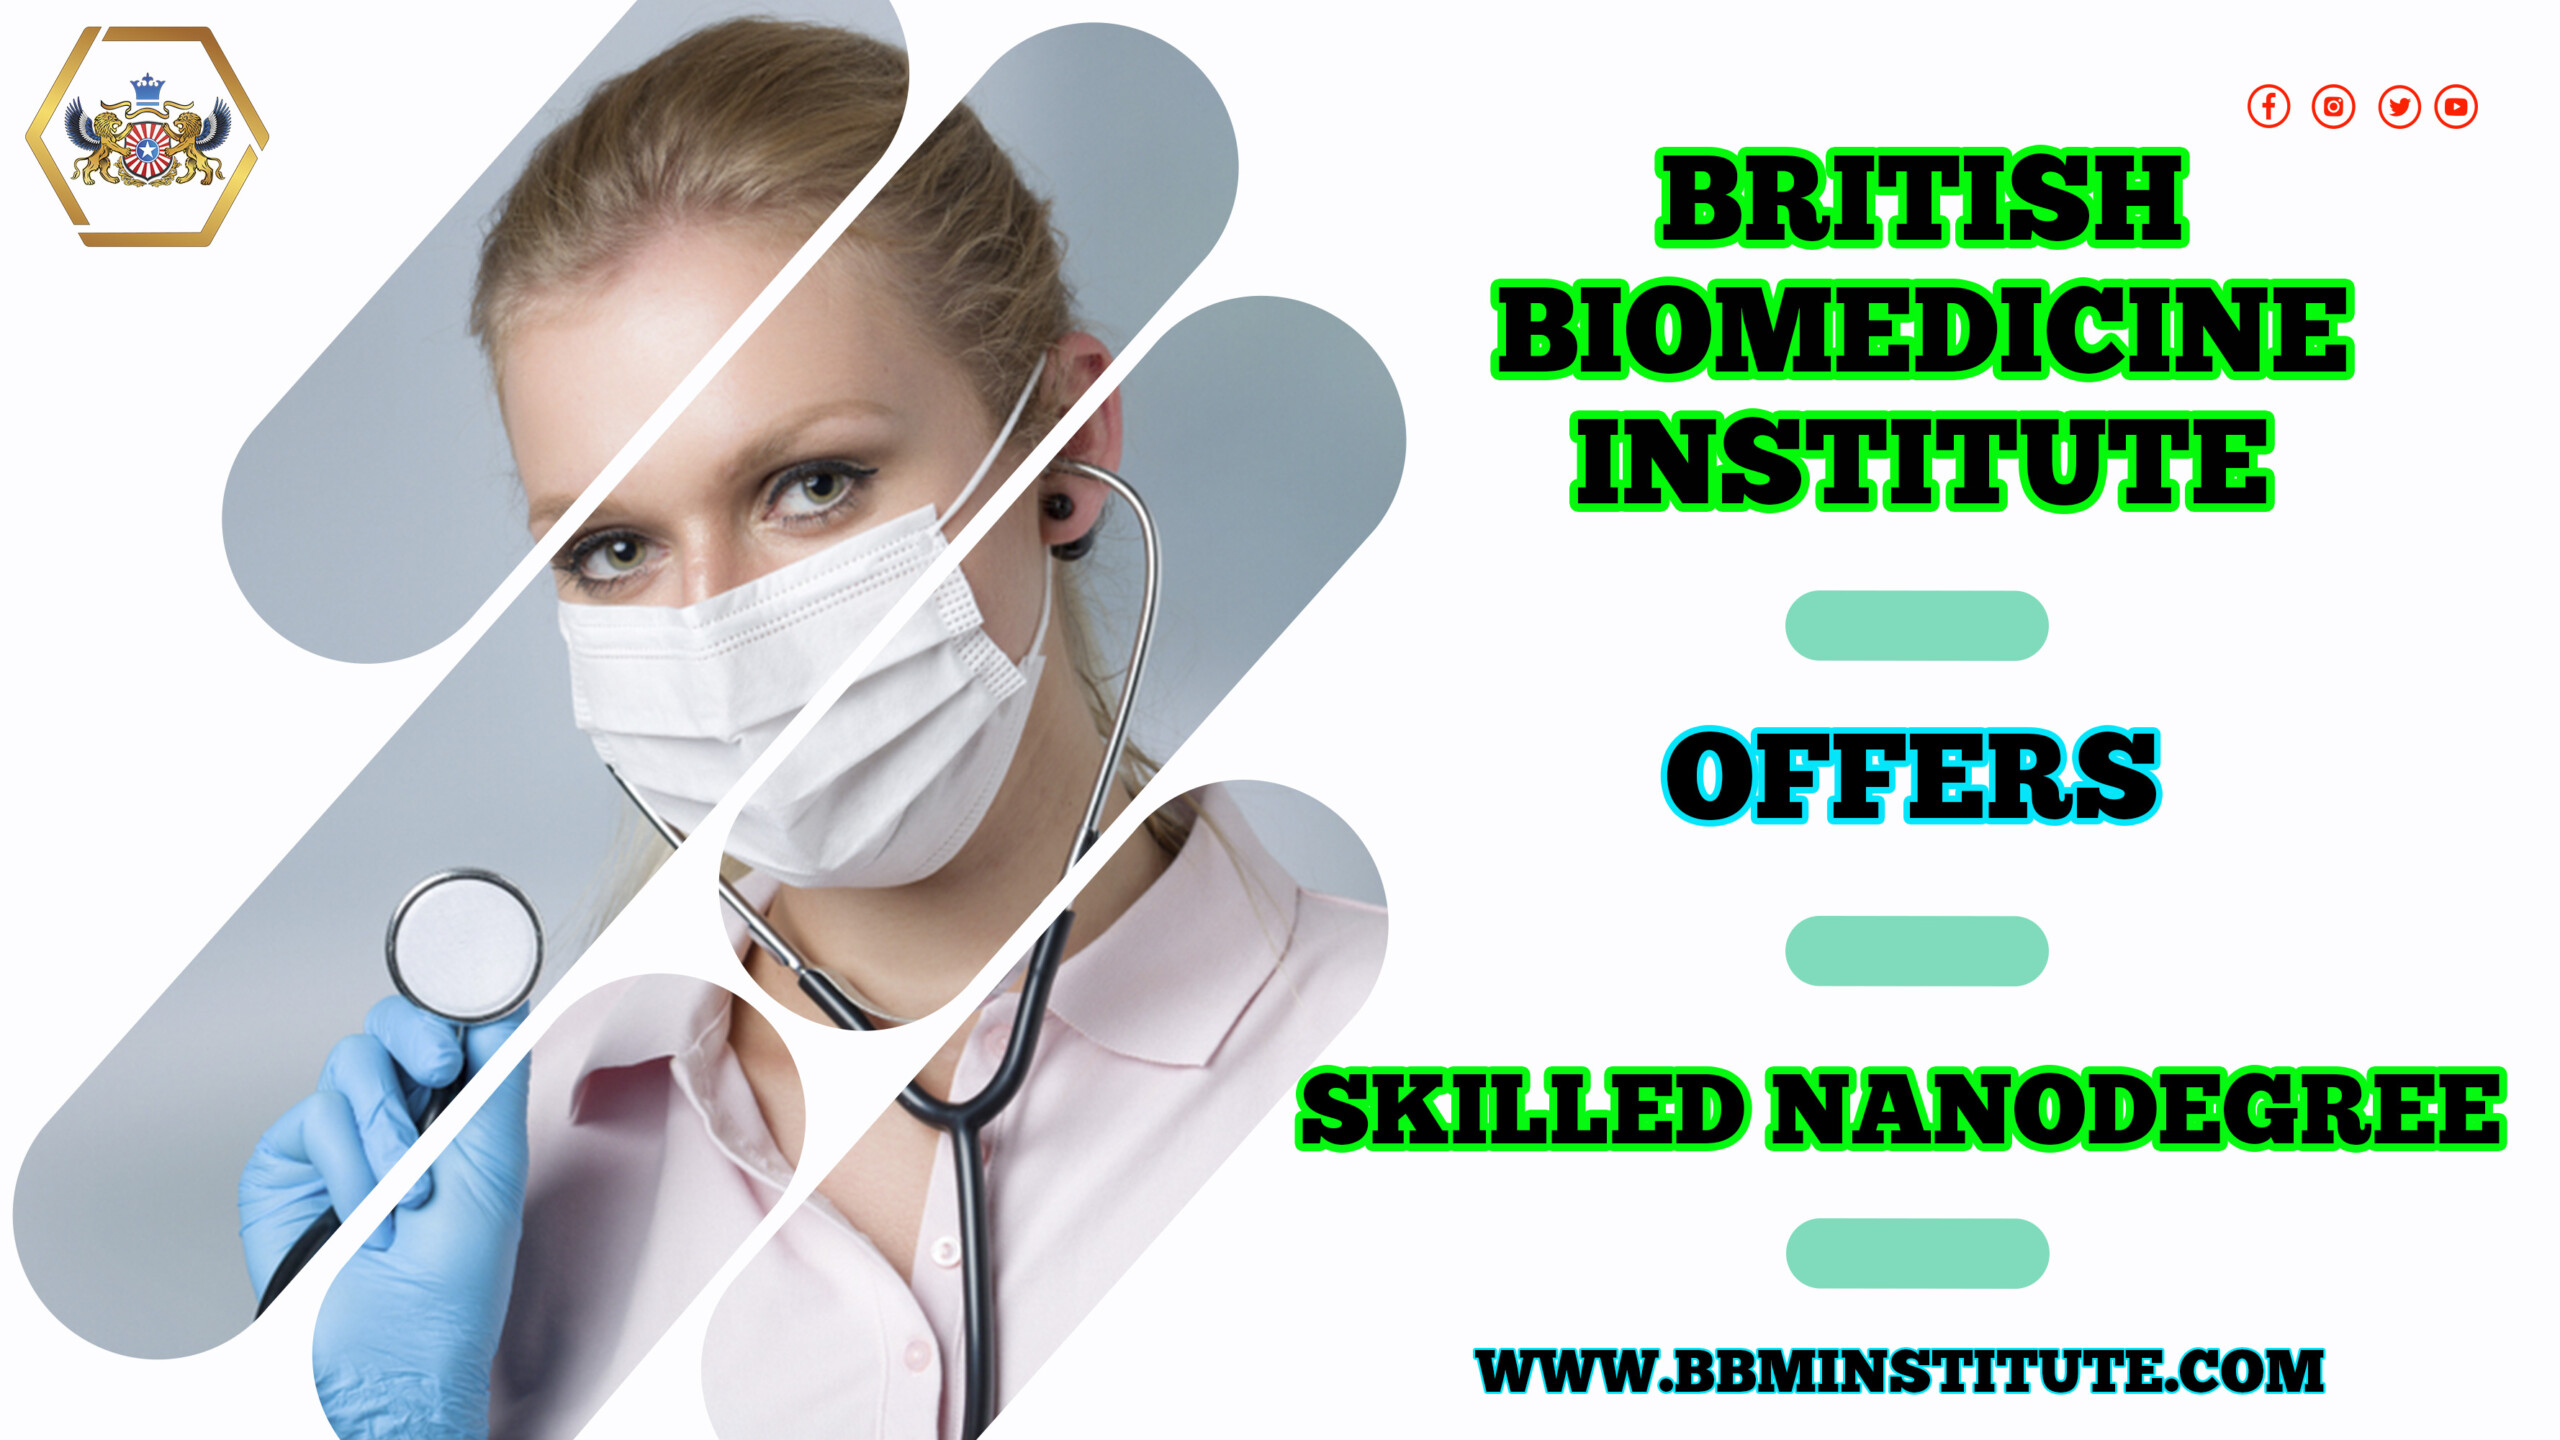 #British #BioMedicine #Institute #An #Evidence And #Skill #Based #eLearning #Platform #bbminstitute #bbmclinicaltrials #britishbiomedicine #bjpmr #bjbmr #BBMI #BSCR #BSMD #BBMCT #BBM #PHM #CPTRA #CCP #BMAI #MDRA #FST #BSFST #BSCCP #BSAI #british #Journal Of #Pharmaceutical And #Medical #Research #British #Journal of #BioMedical #Research #Clinical #Research #Medical #Device #offers #Skilled #NanoDegree in #Clinical #Trials, #Pharmacovigilance and #Regulatory #Affairs (#CTPRA) #Food #Science #Technology #Clinical #Child #Psychology #Medical #Device #Regulatory #Affairs #Public #Health #Management #Yoga #Health #BritishChildPsychology #BritishWorldNews #BritishBioMolecule #BritishBioMedicineClinicalTrials #BritishYoga #EvidenceBasedSkills #ExclusiveAIIMSHospital #Dermatologytrials #CardiovascularTrials #DiabetesTrials #OncologyTrials #HematologyTrials #PediatricTrials #CovidTrials #NeuroScienceTrials #GyneacologyTrials #GastroenterologyTrials #RareDiseaseTrials #AutoImmuneTrials #InfectiousDiseaseTrials #EndocrineTrials #OpthalmologyTrials #NephrologyTrials #ConductClinicalTrials #directorbbmclinicaltrialscom